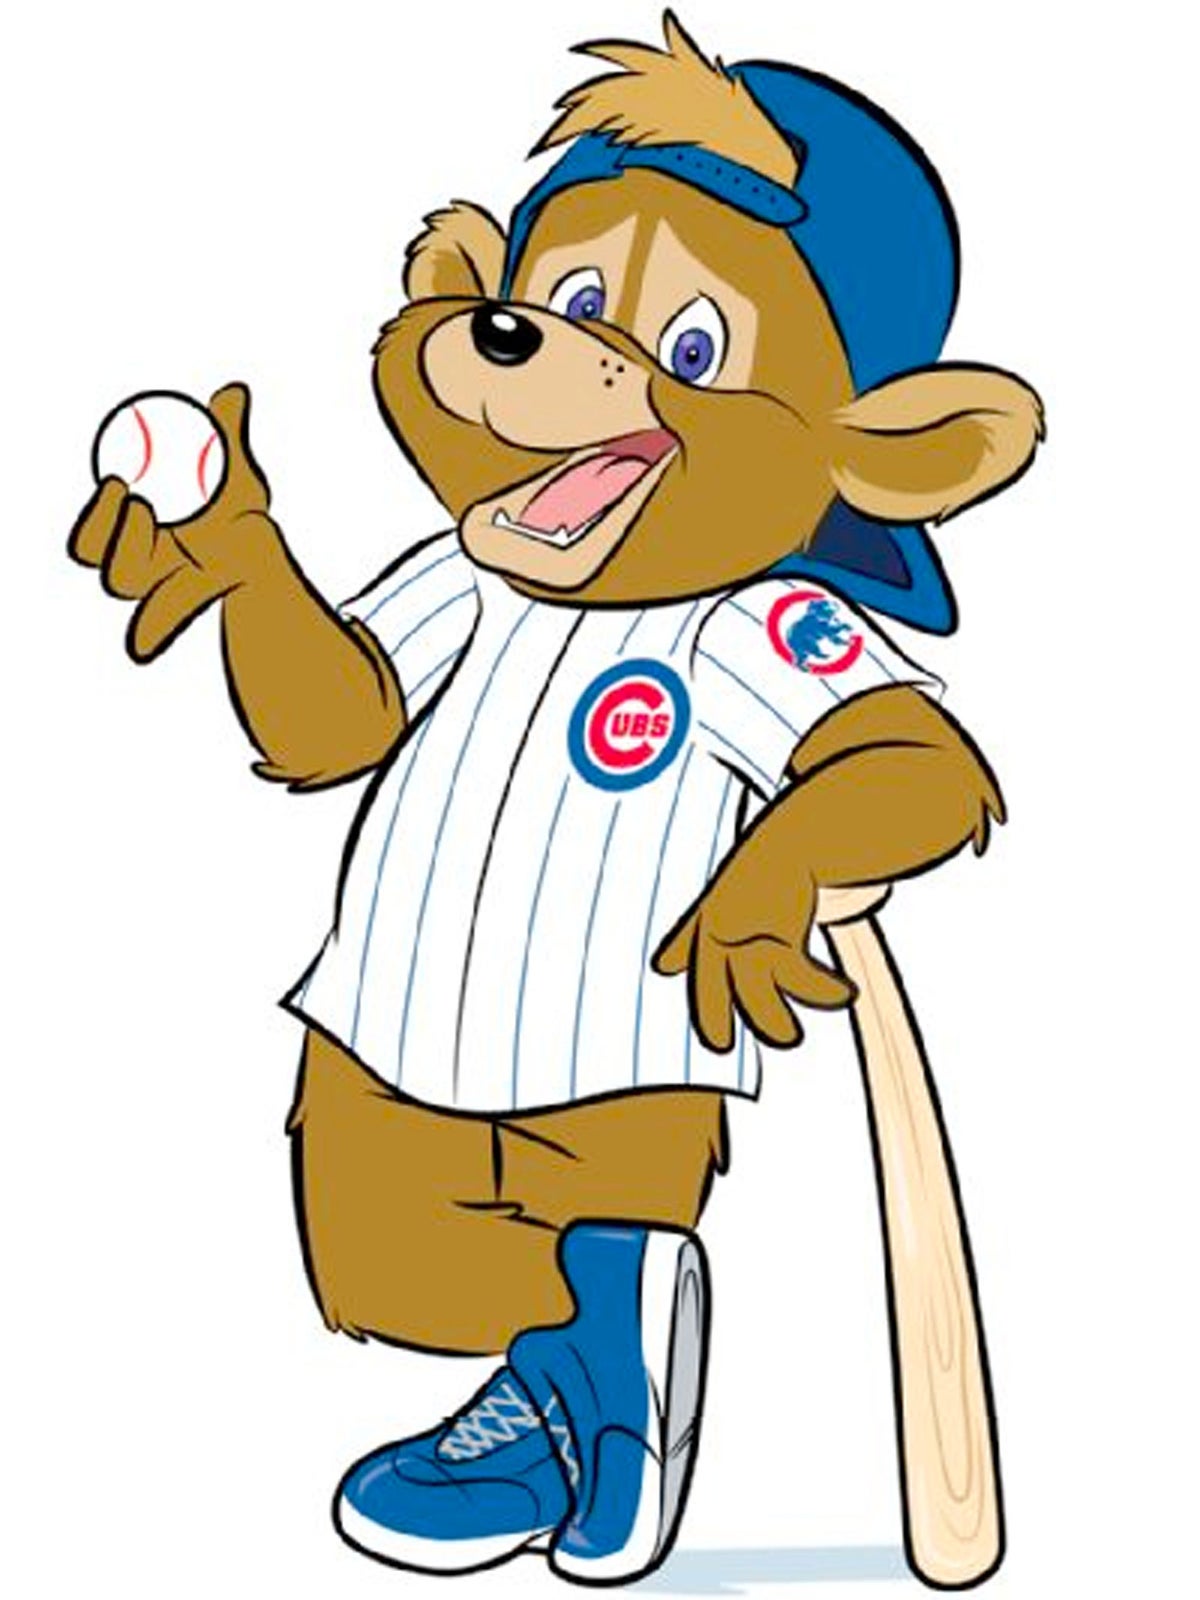 In defense of Clark, the Cubs' widely reviled new mascot